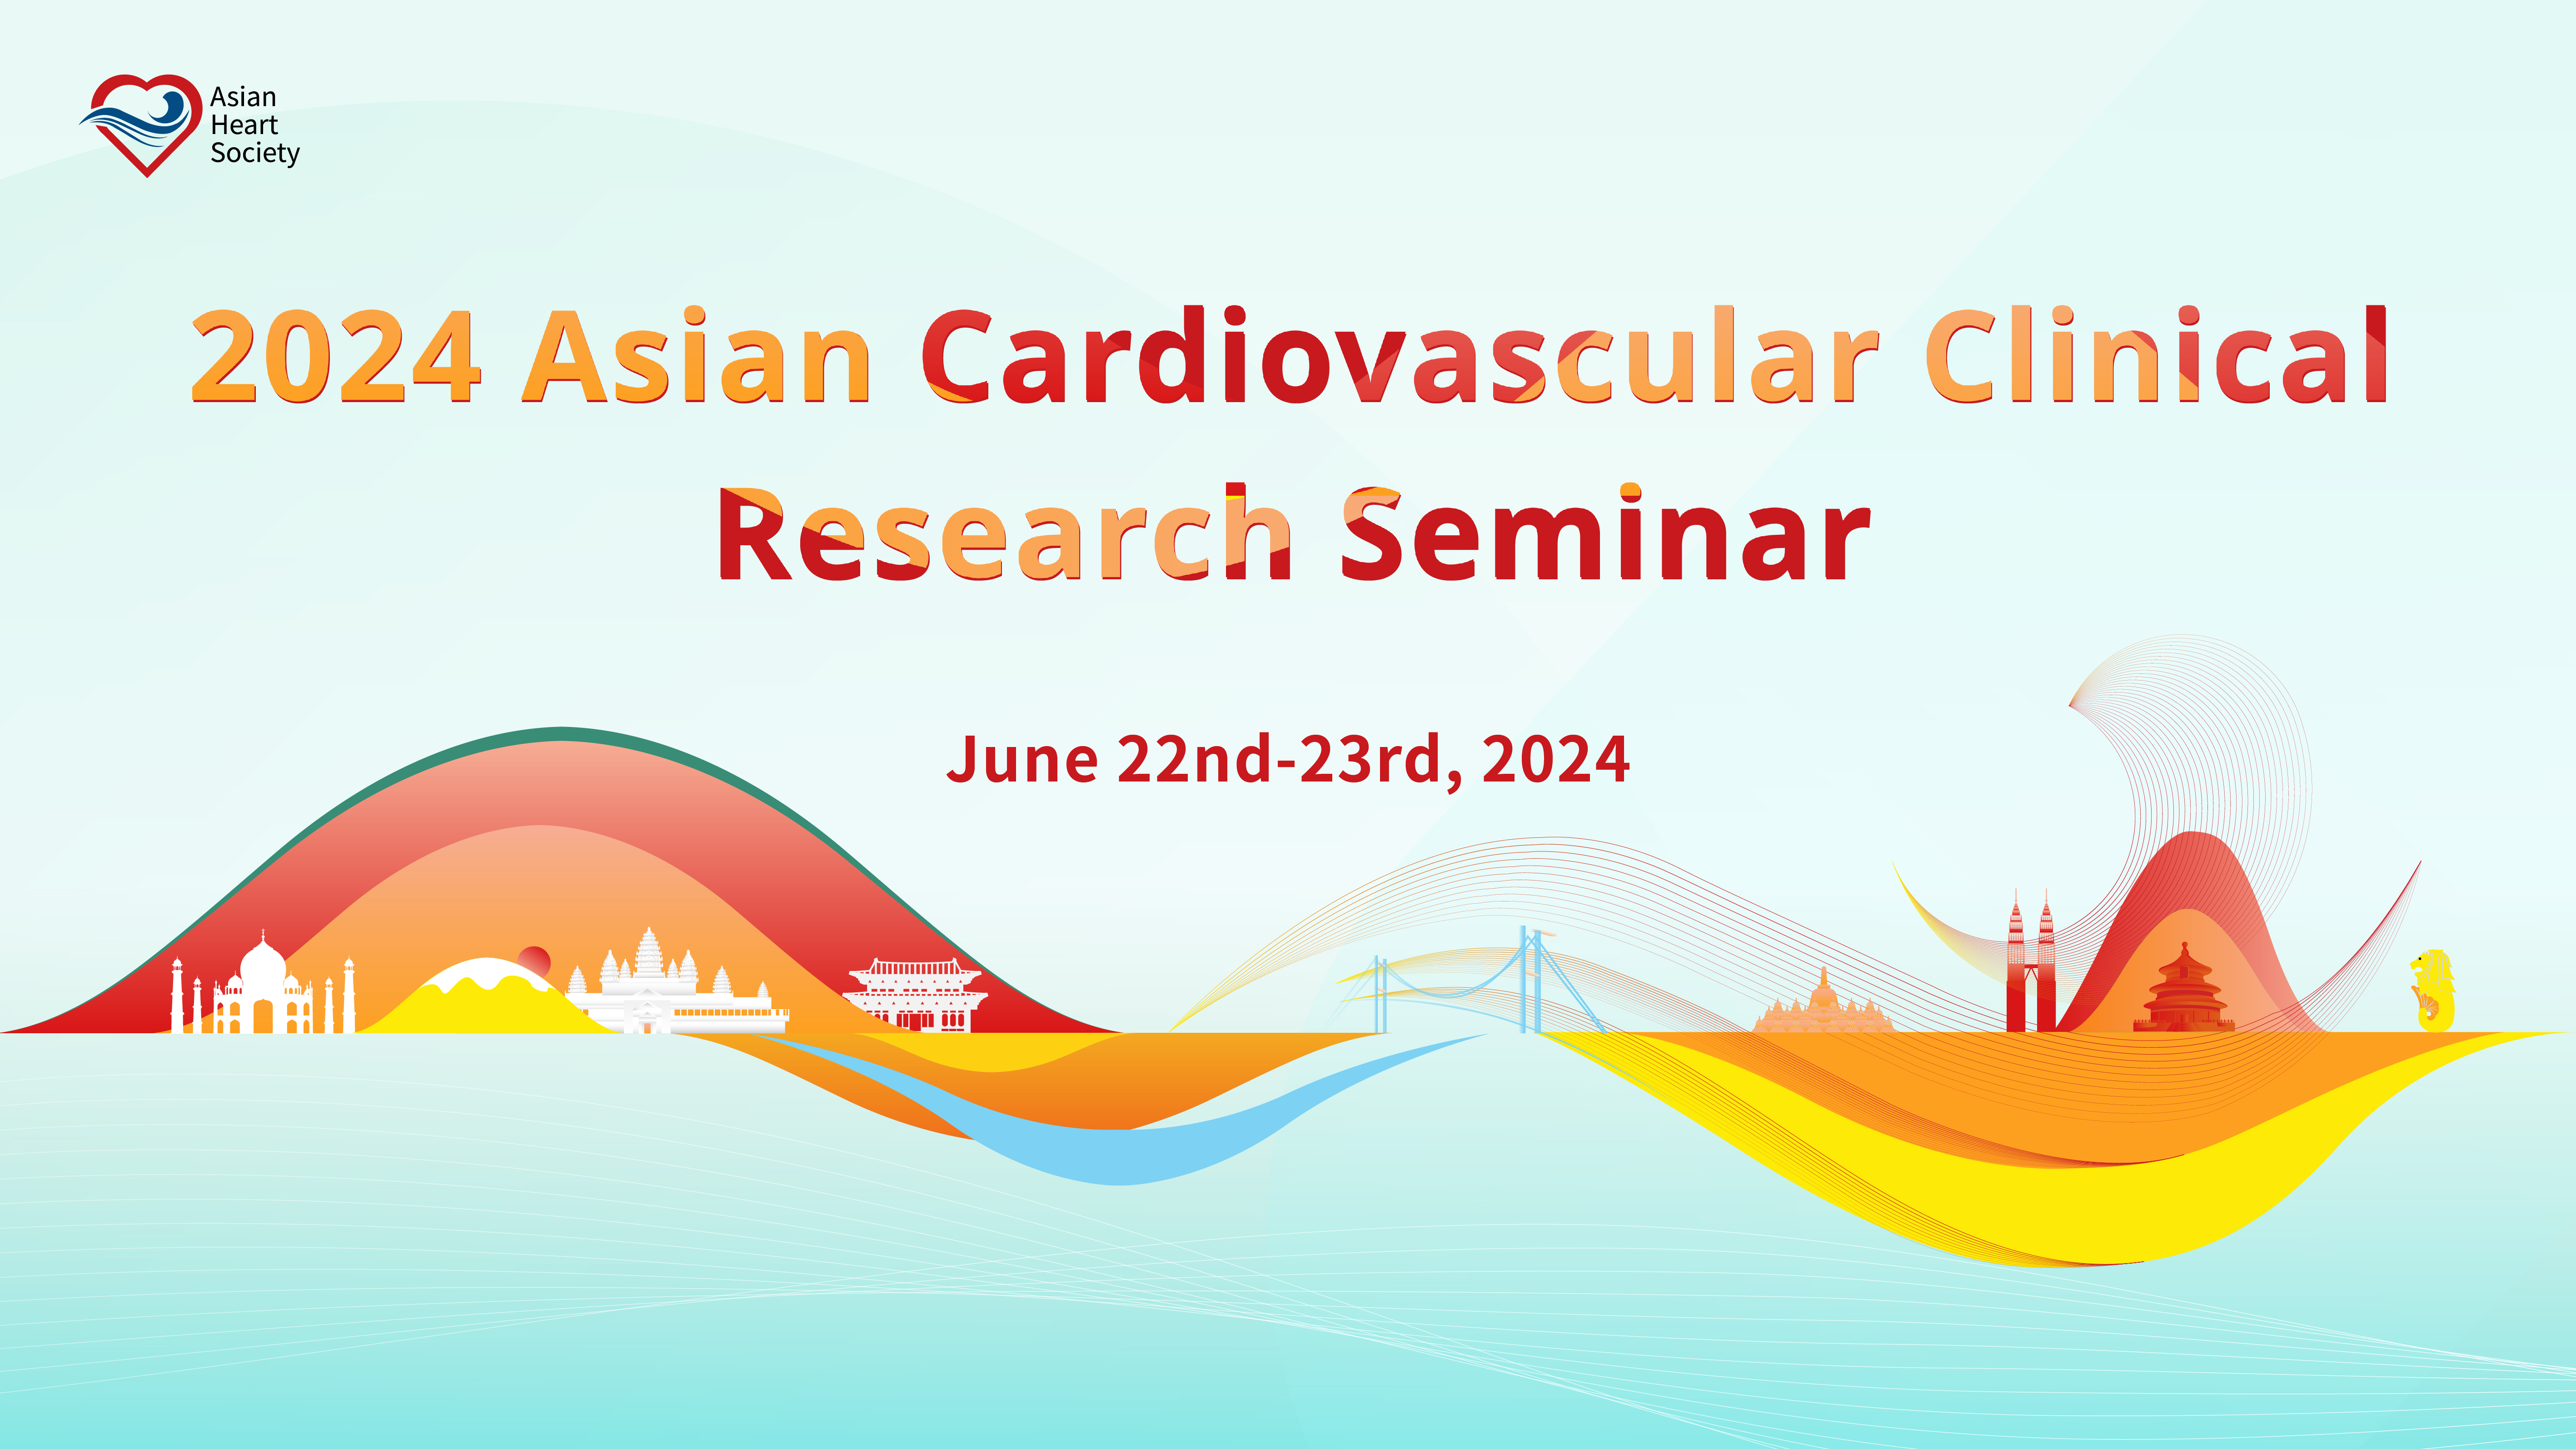 The 2024 Asian Cardiovascular Clinical Research Seminar will be held virtually from 22 to 23 June, 2024